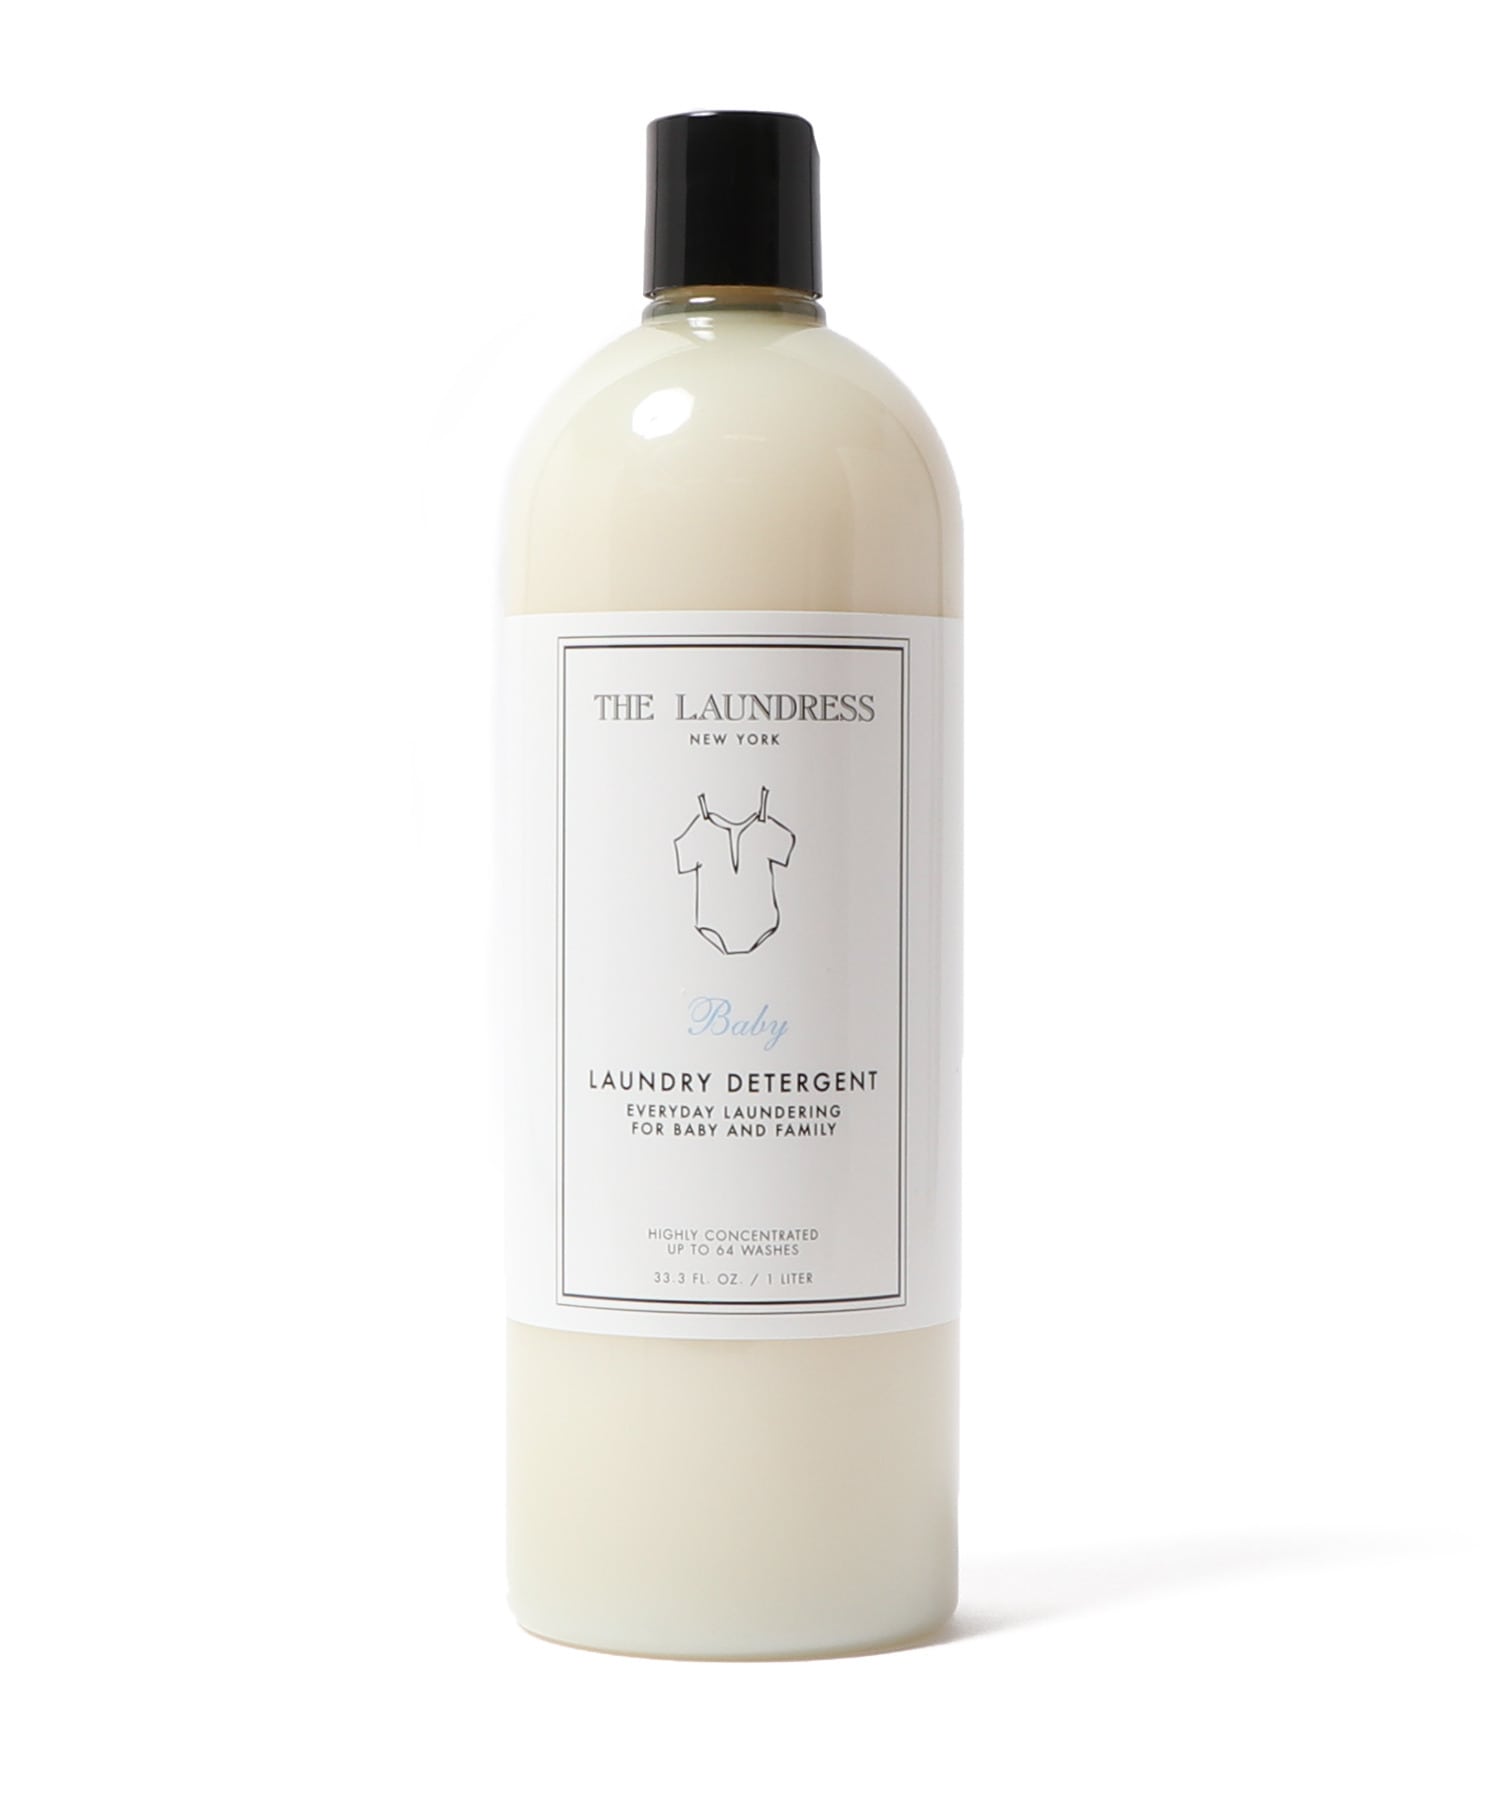 The Laundress Quot Baby Quot ベビーデタージェント 1l ベビー衣類用洗濯洗剤 Estnation Online Store エストネーション 公式通販